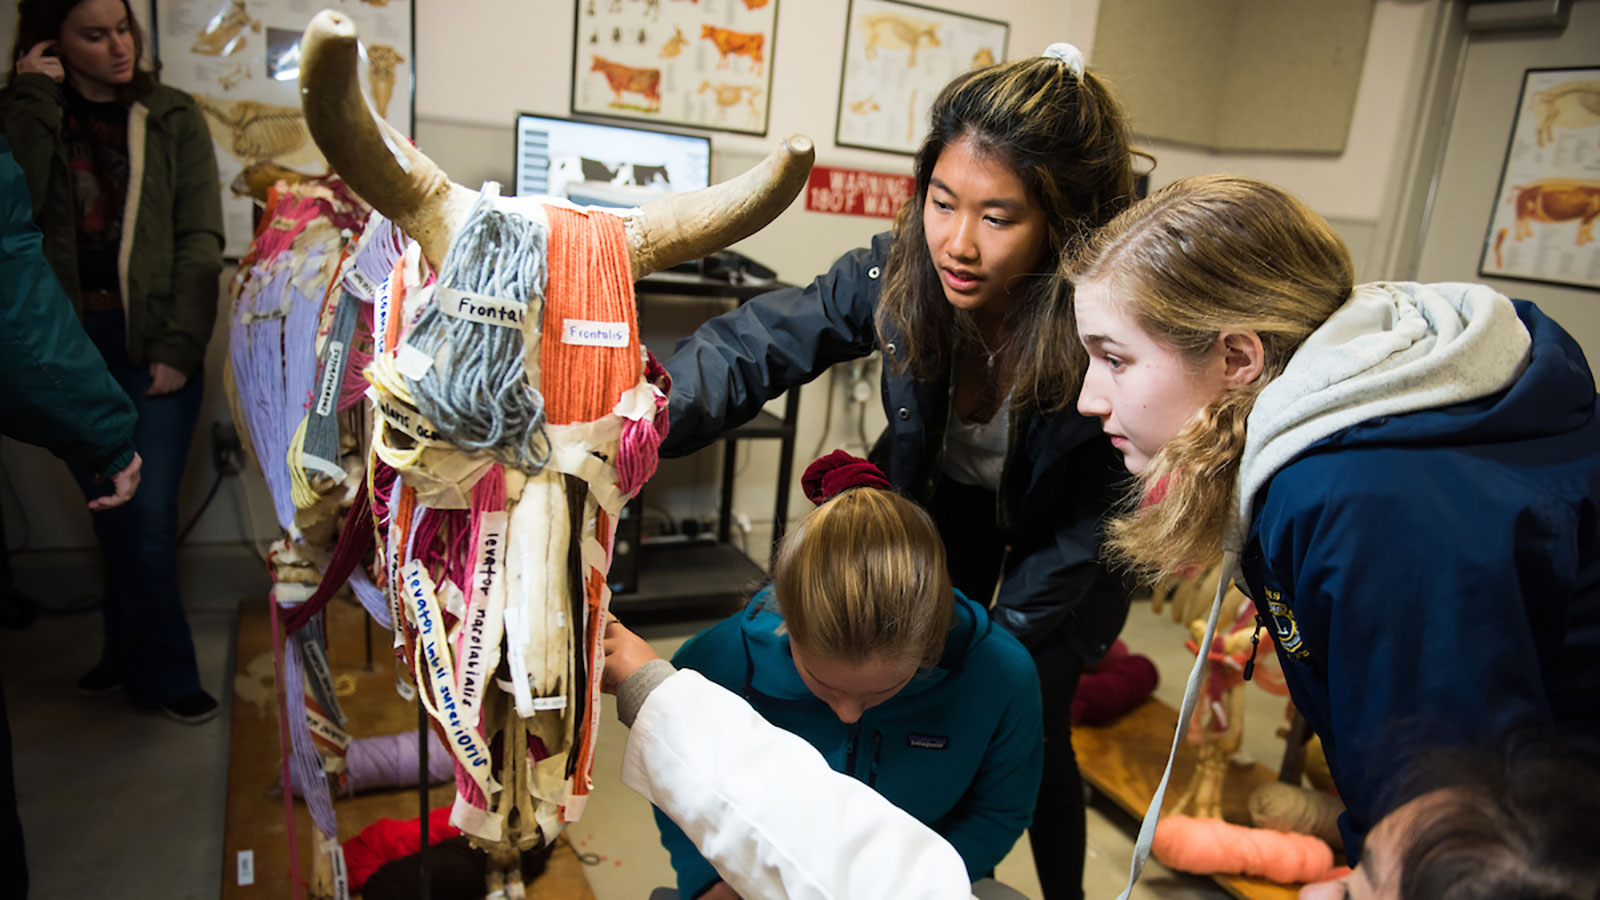 Animal science students using model to study cattle musculature